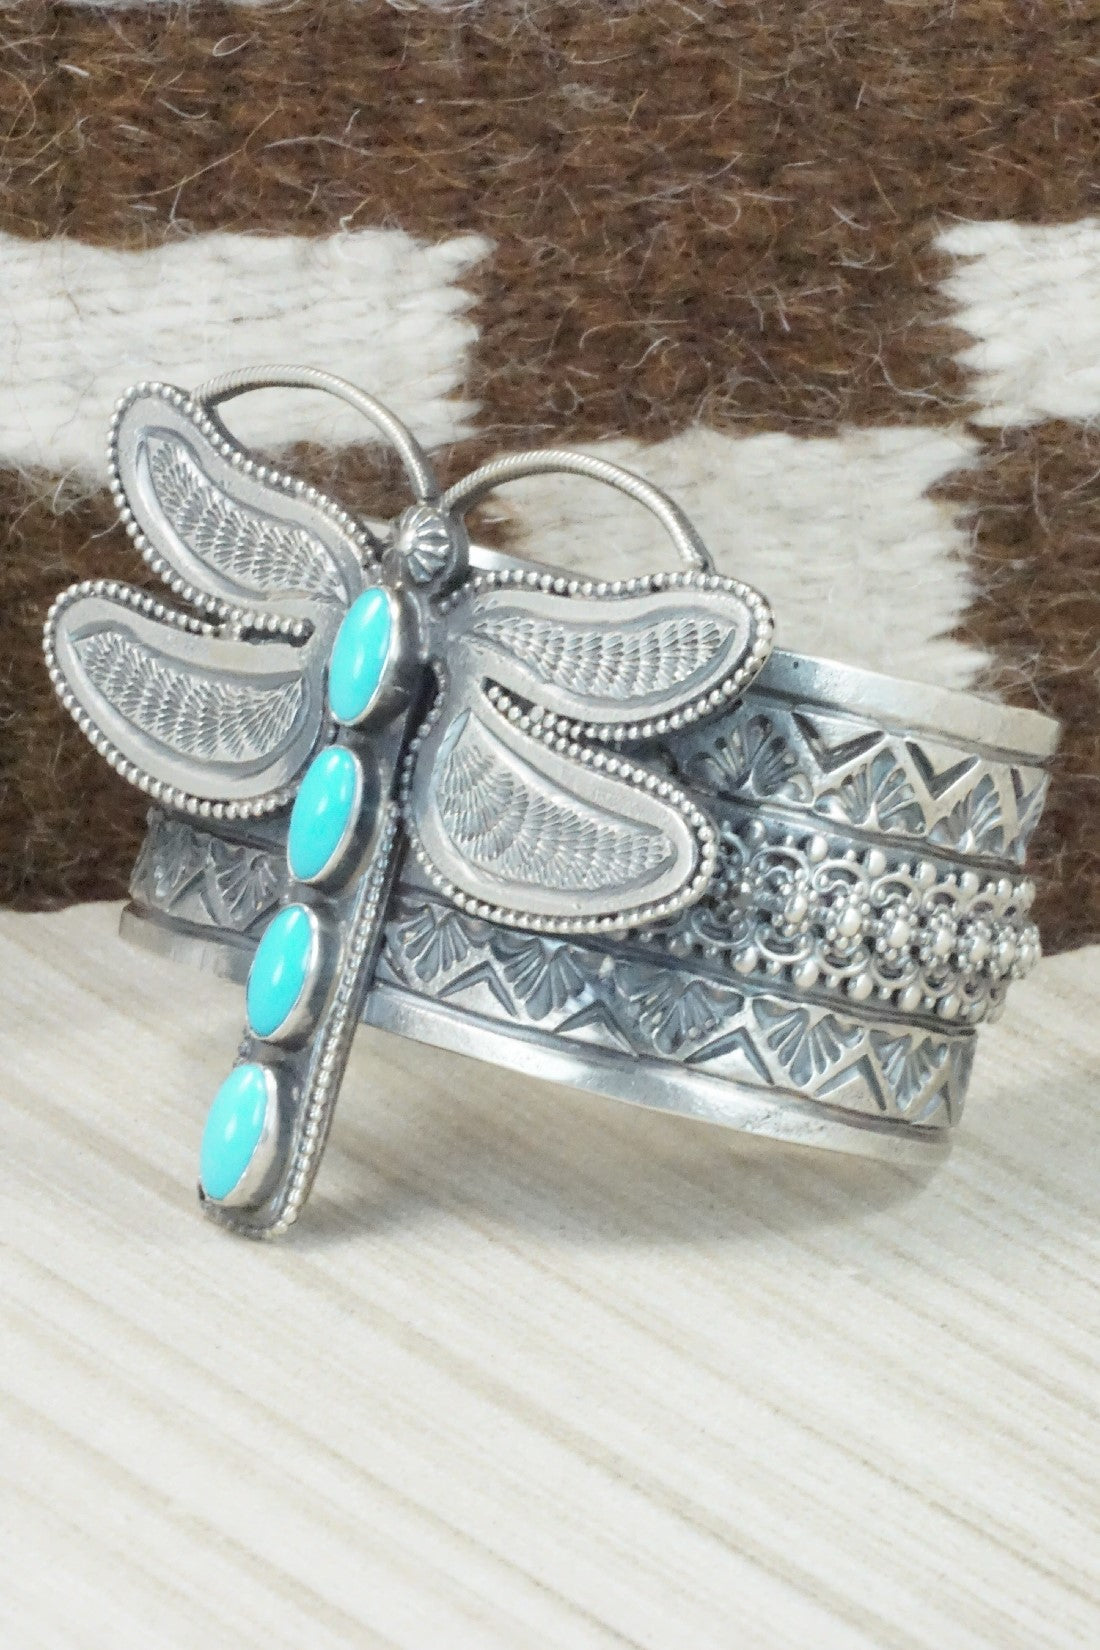 Turquoise & Sterling Silver Bracelet and Ring - Hemerson Brown